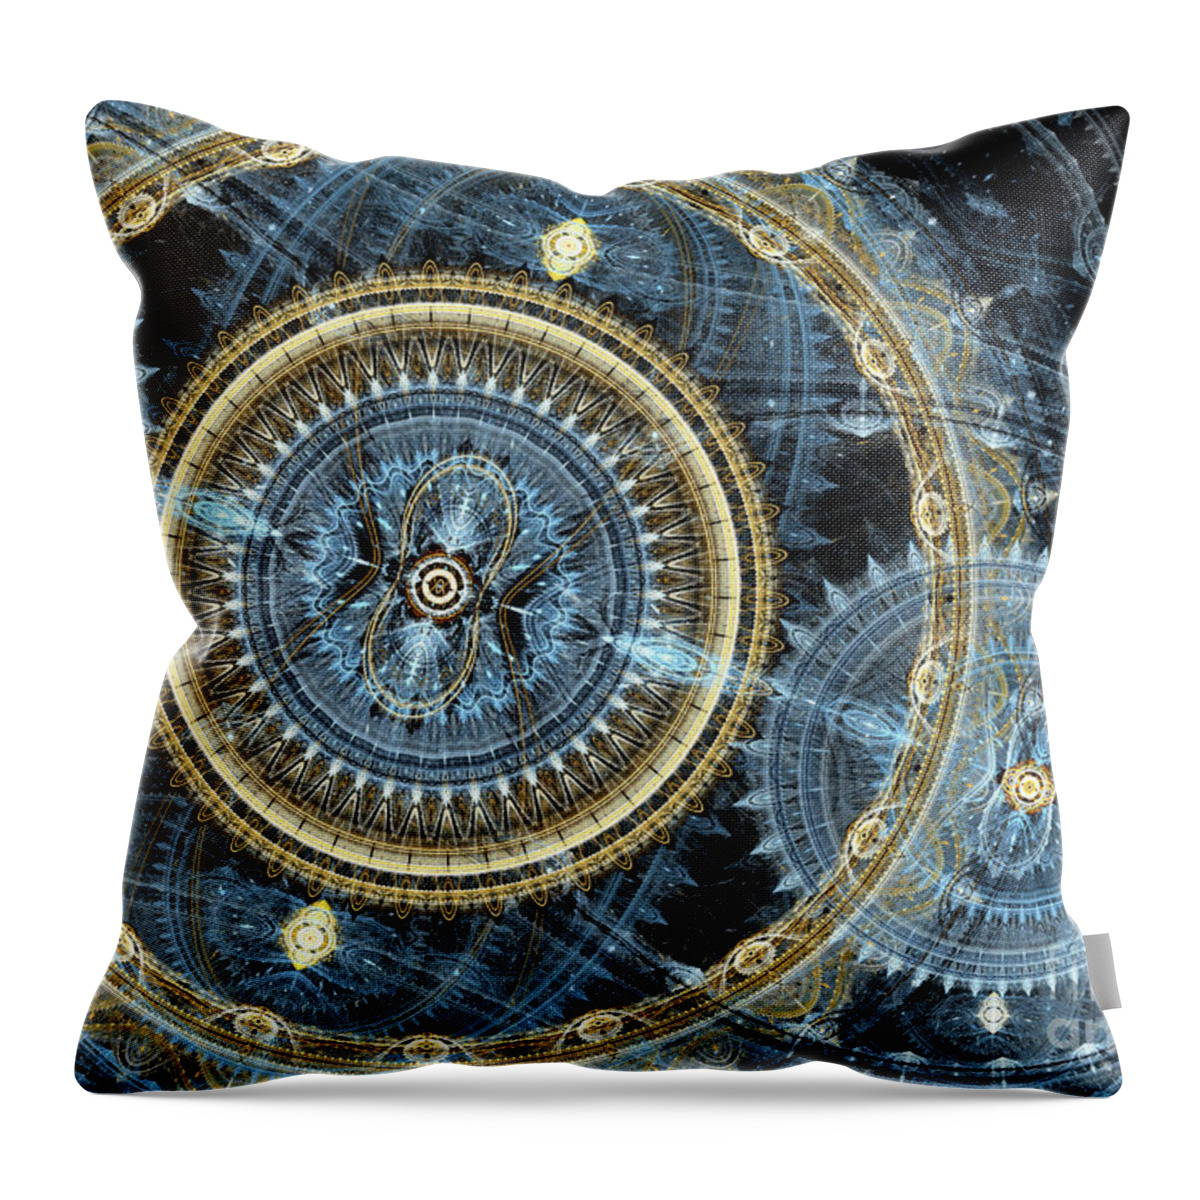 Abstract Throw Pillow featuring the digital art Blue and gold mechanical abstract by Martin Capek